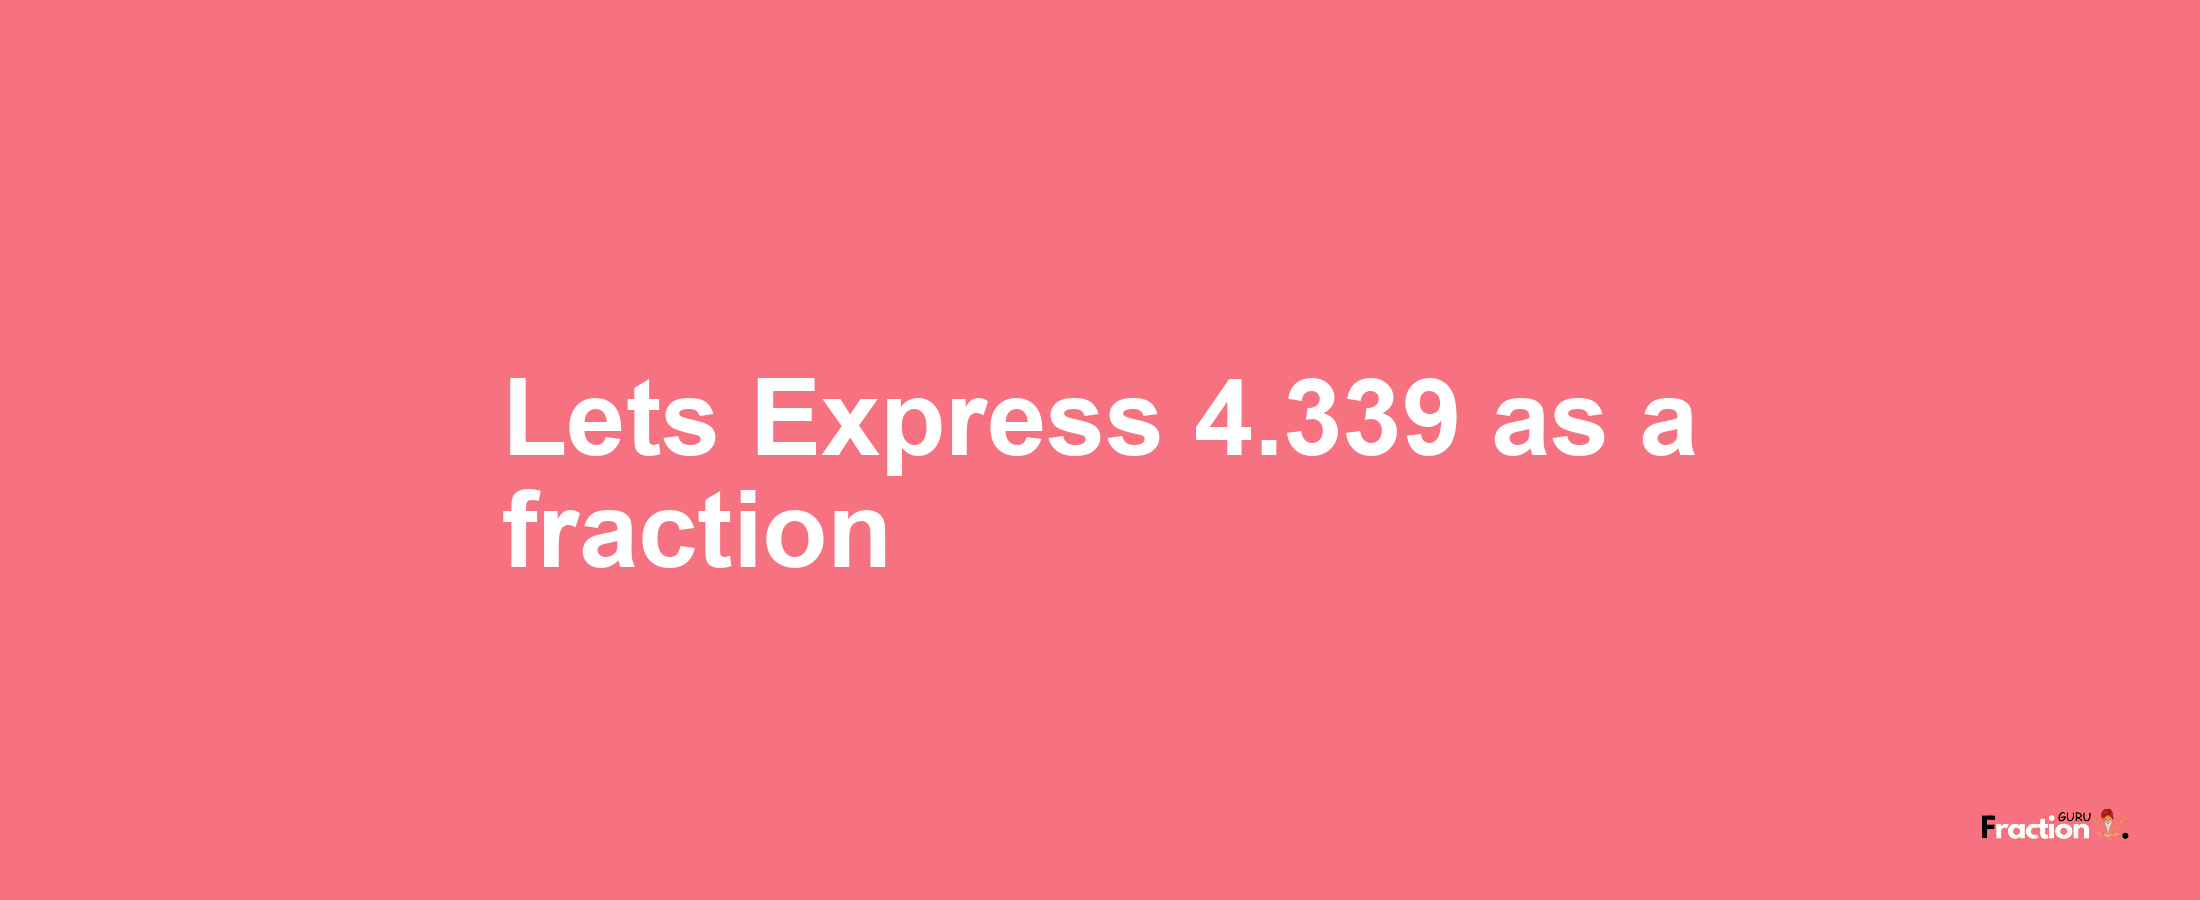 Lets Express 4.339 as afraction